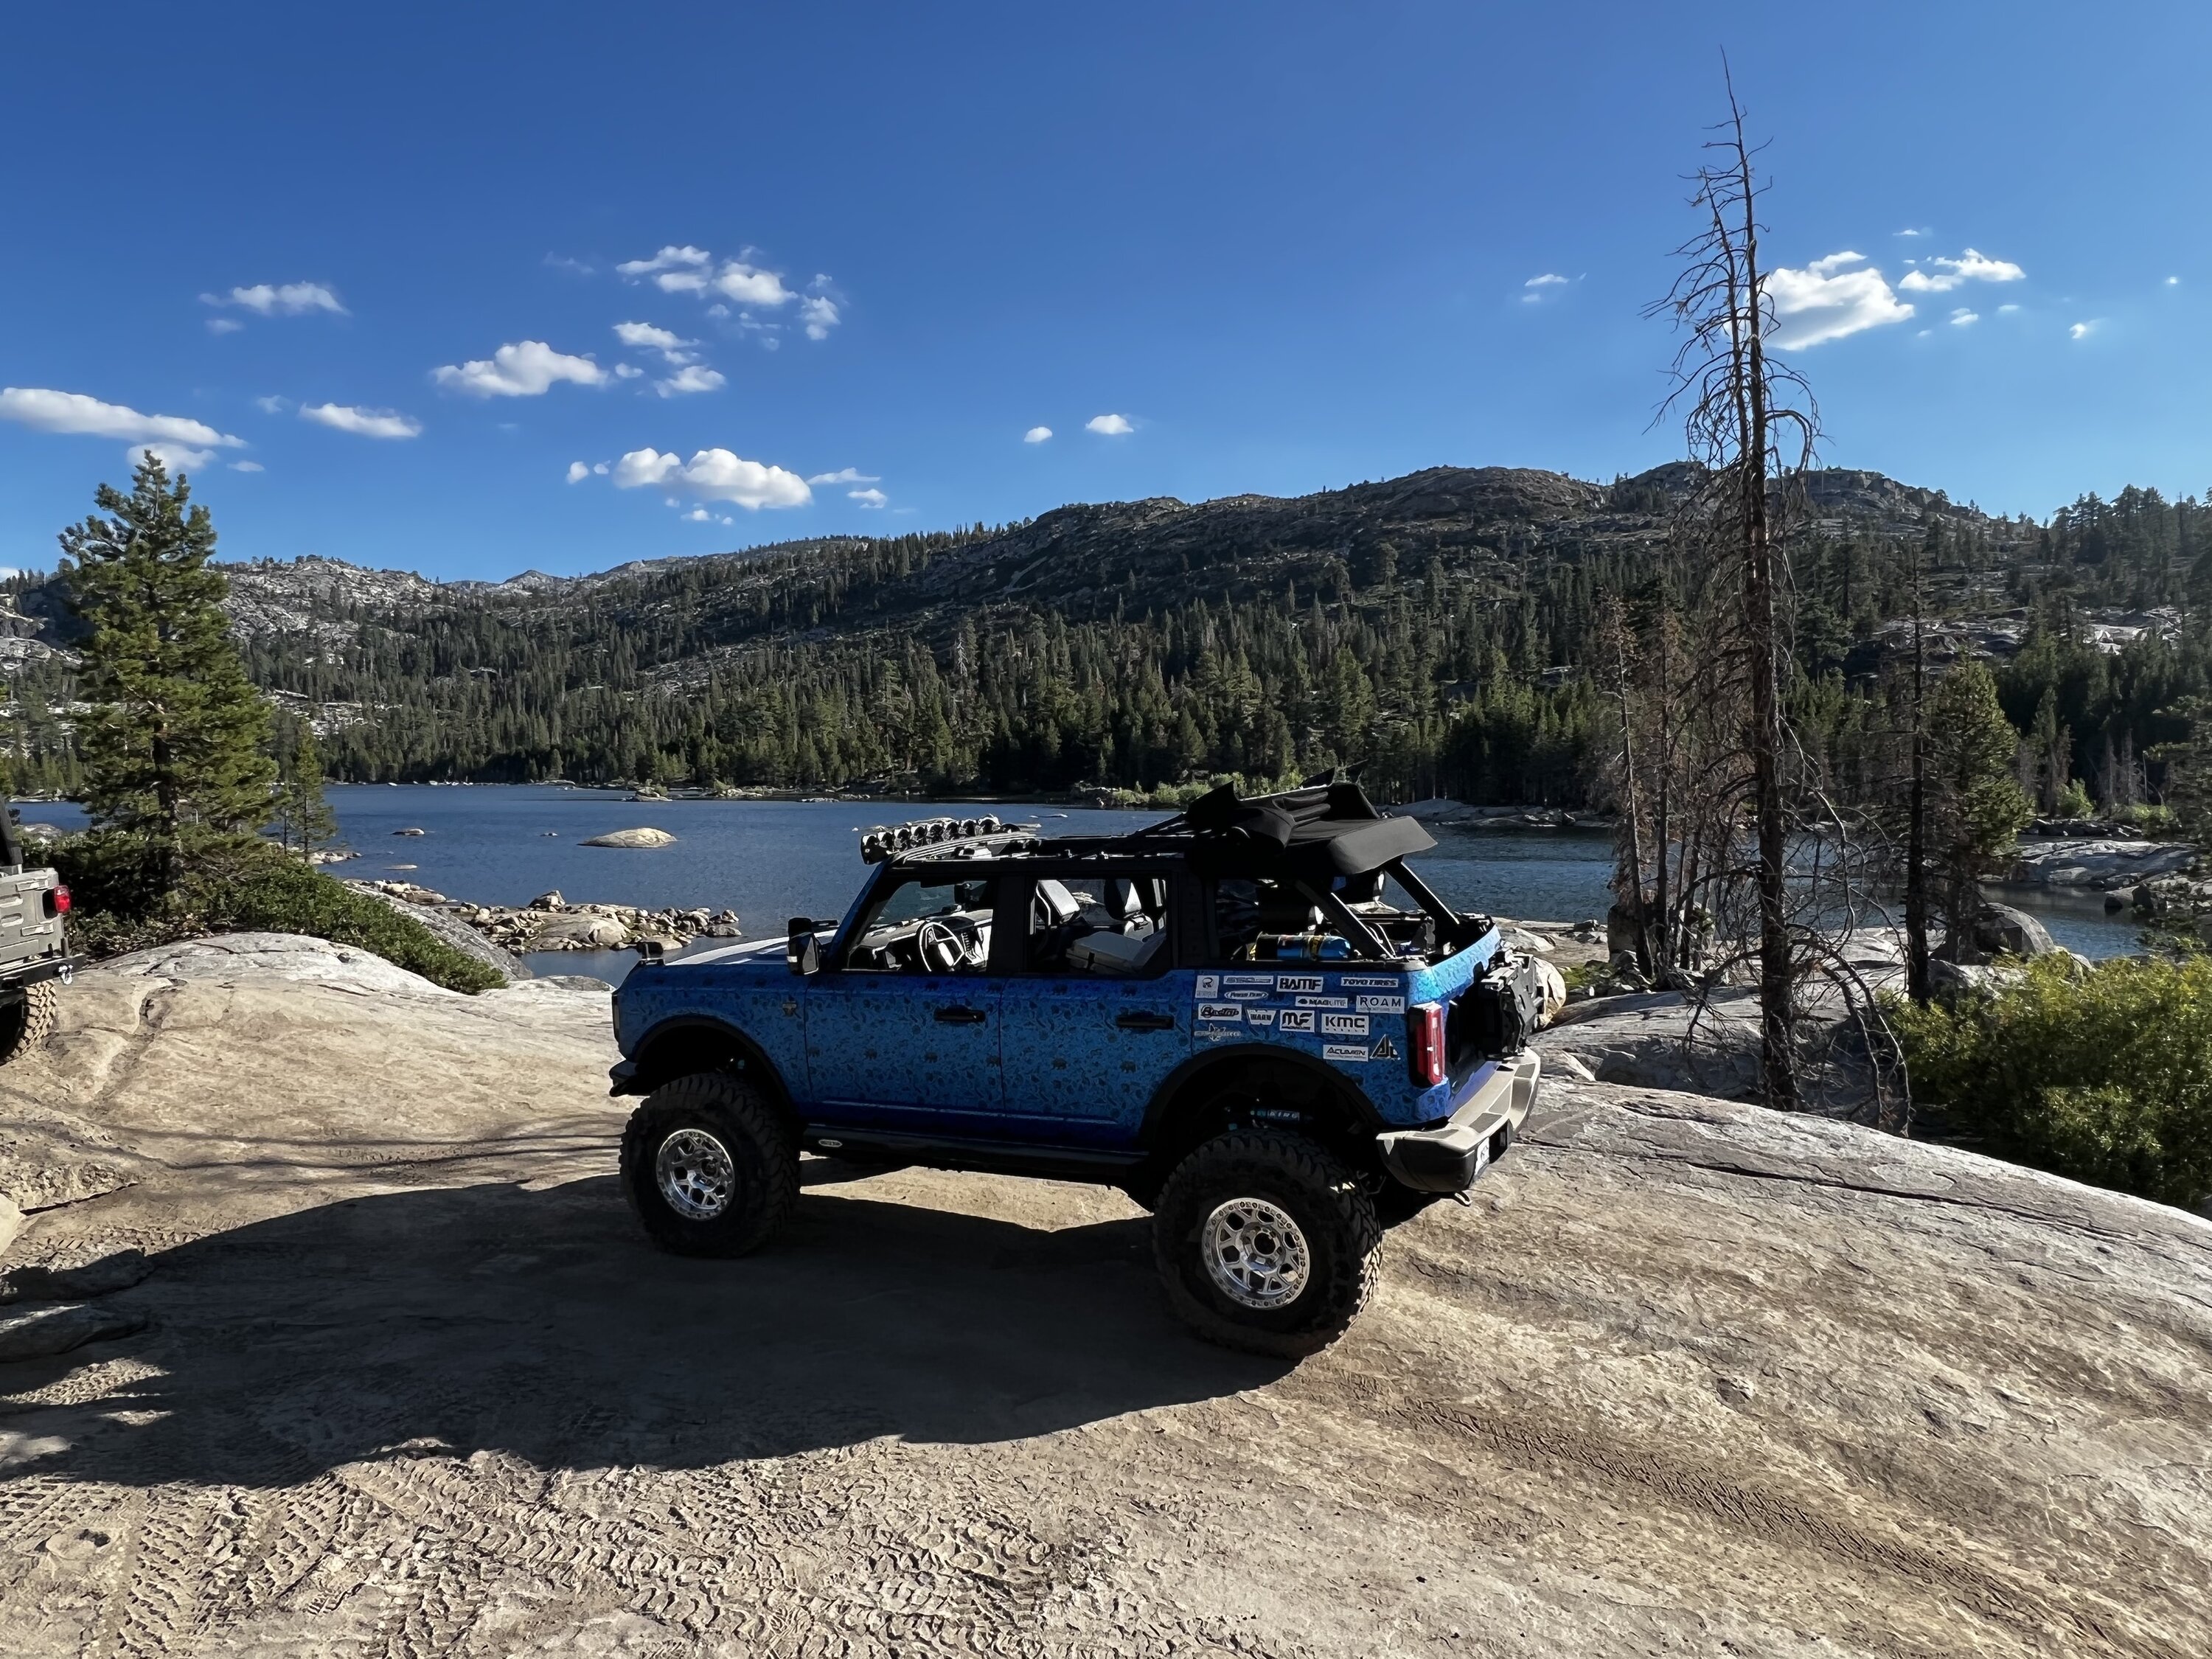 Ford Bronco Broncos on the Rubicon Trail in NorCal 83FDF1A9-4ED1-4FB2-8156-2D558405EC35